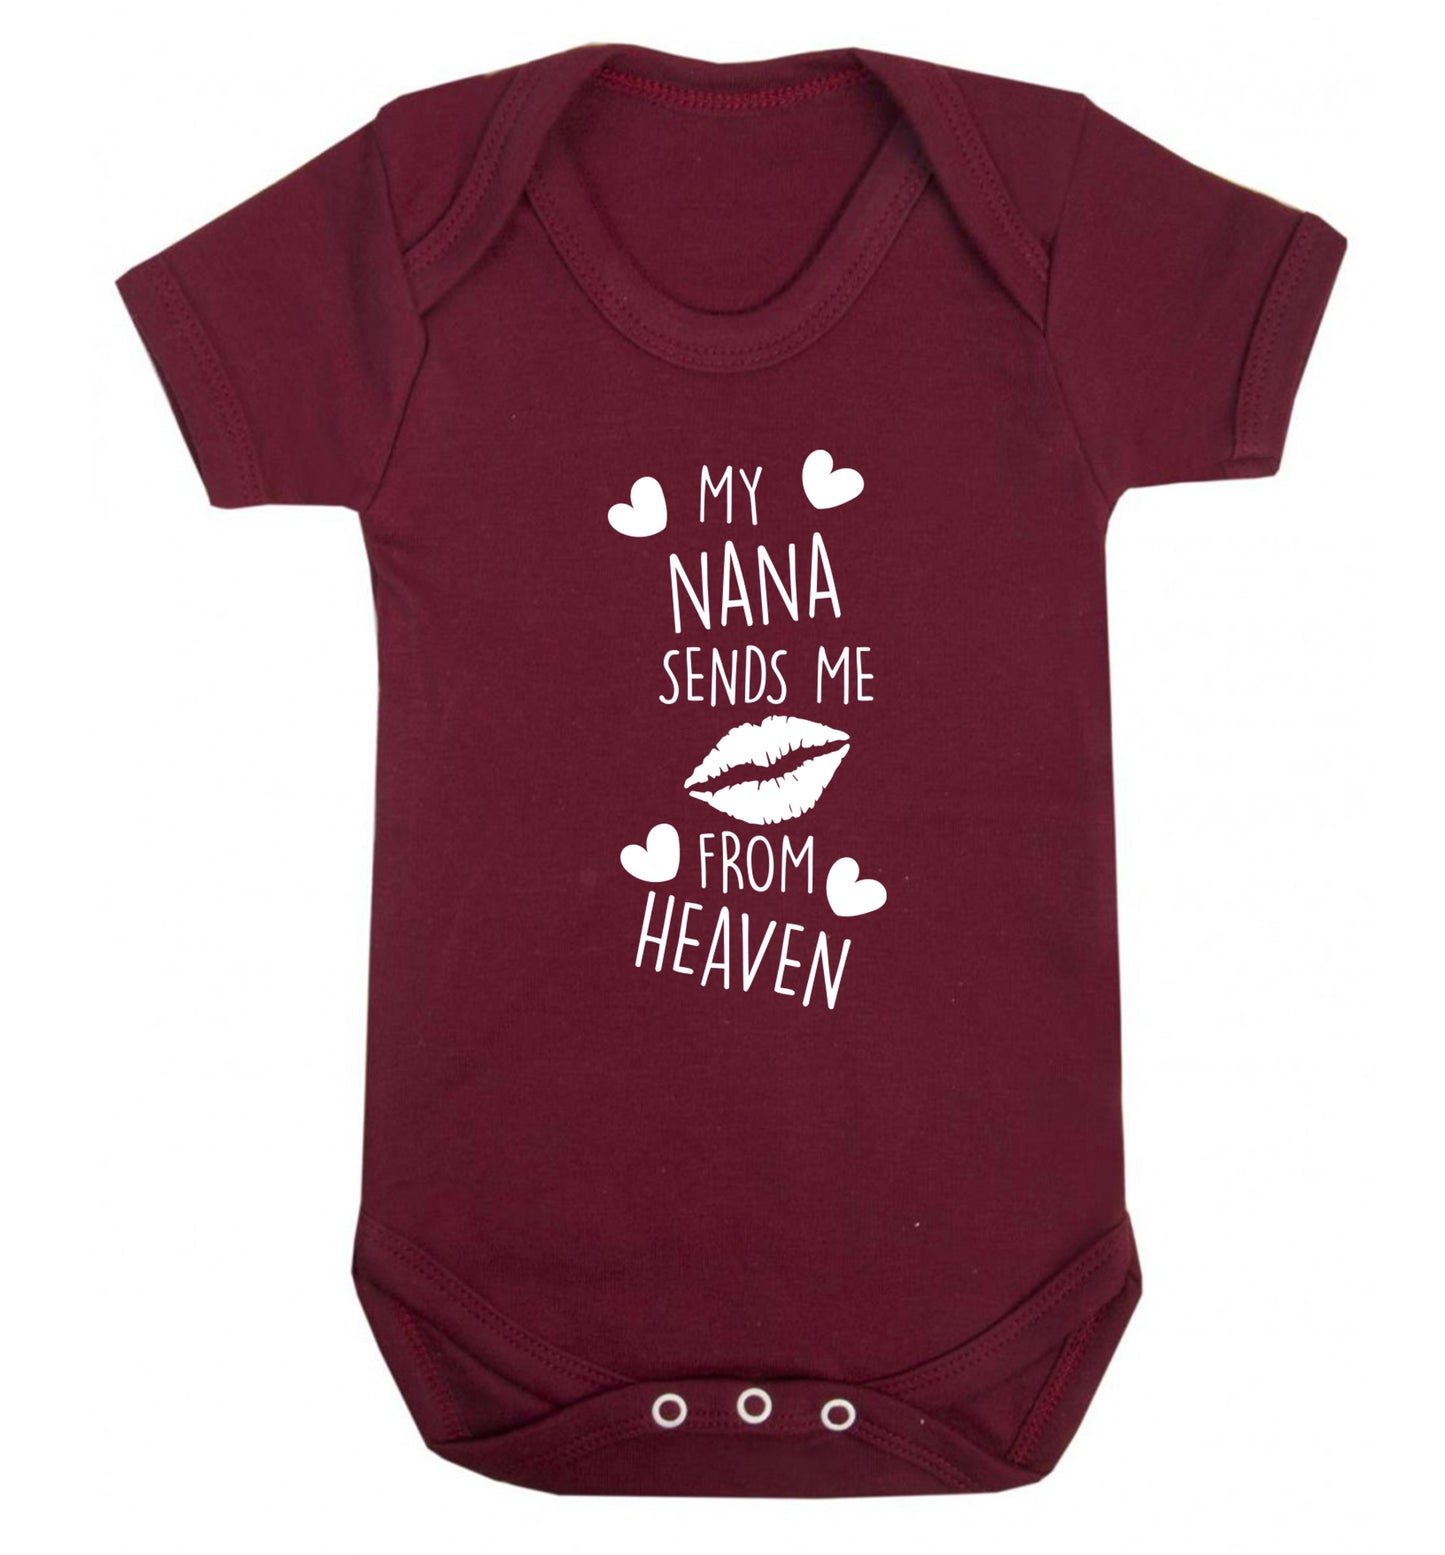 My nana sends me kisses from heaven Baby Vest maroon 18-24 months